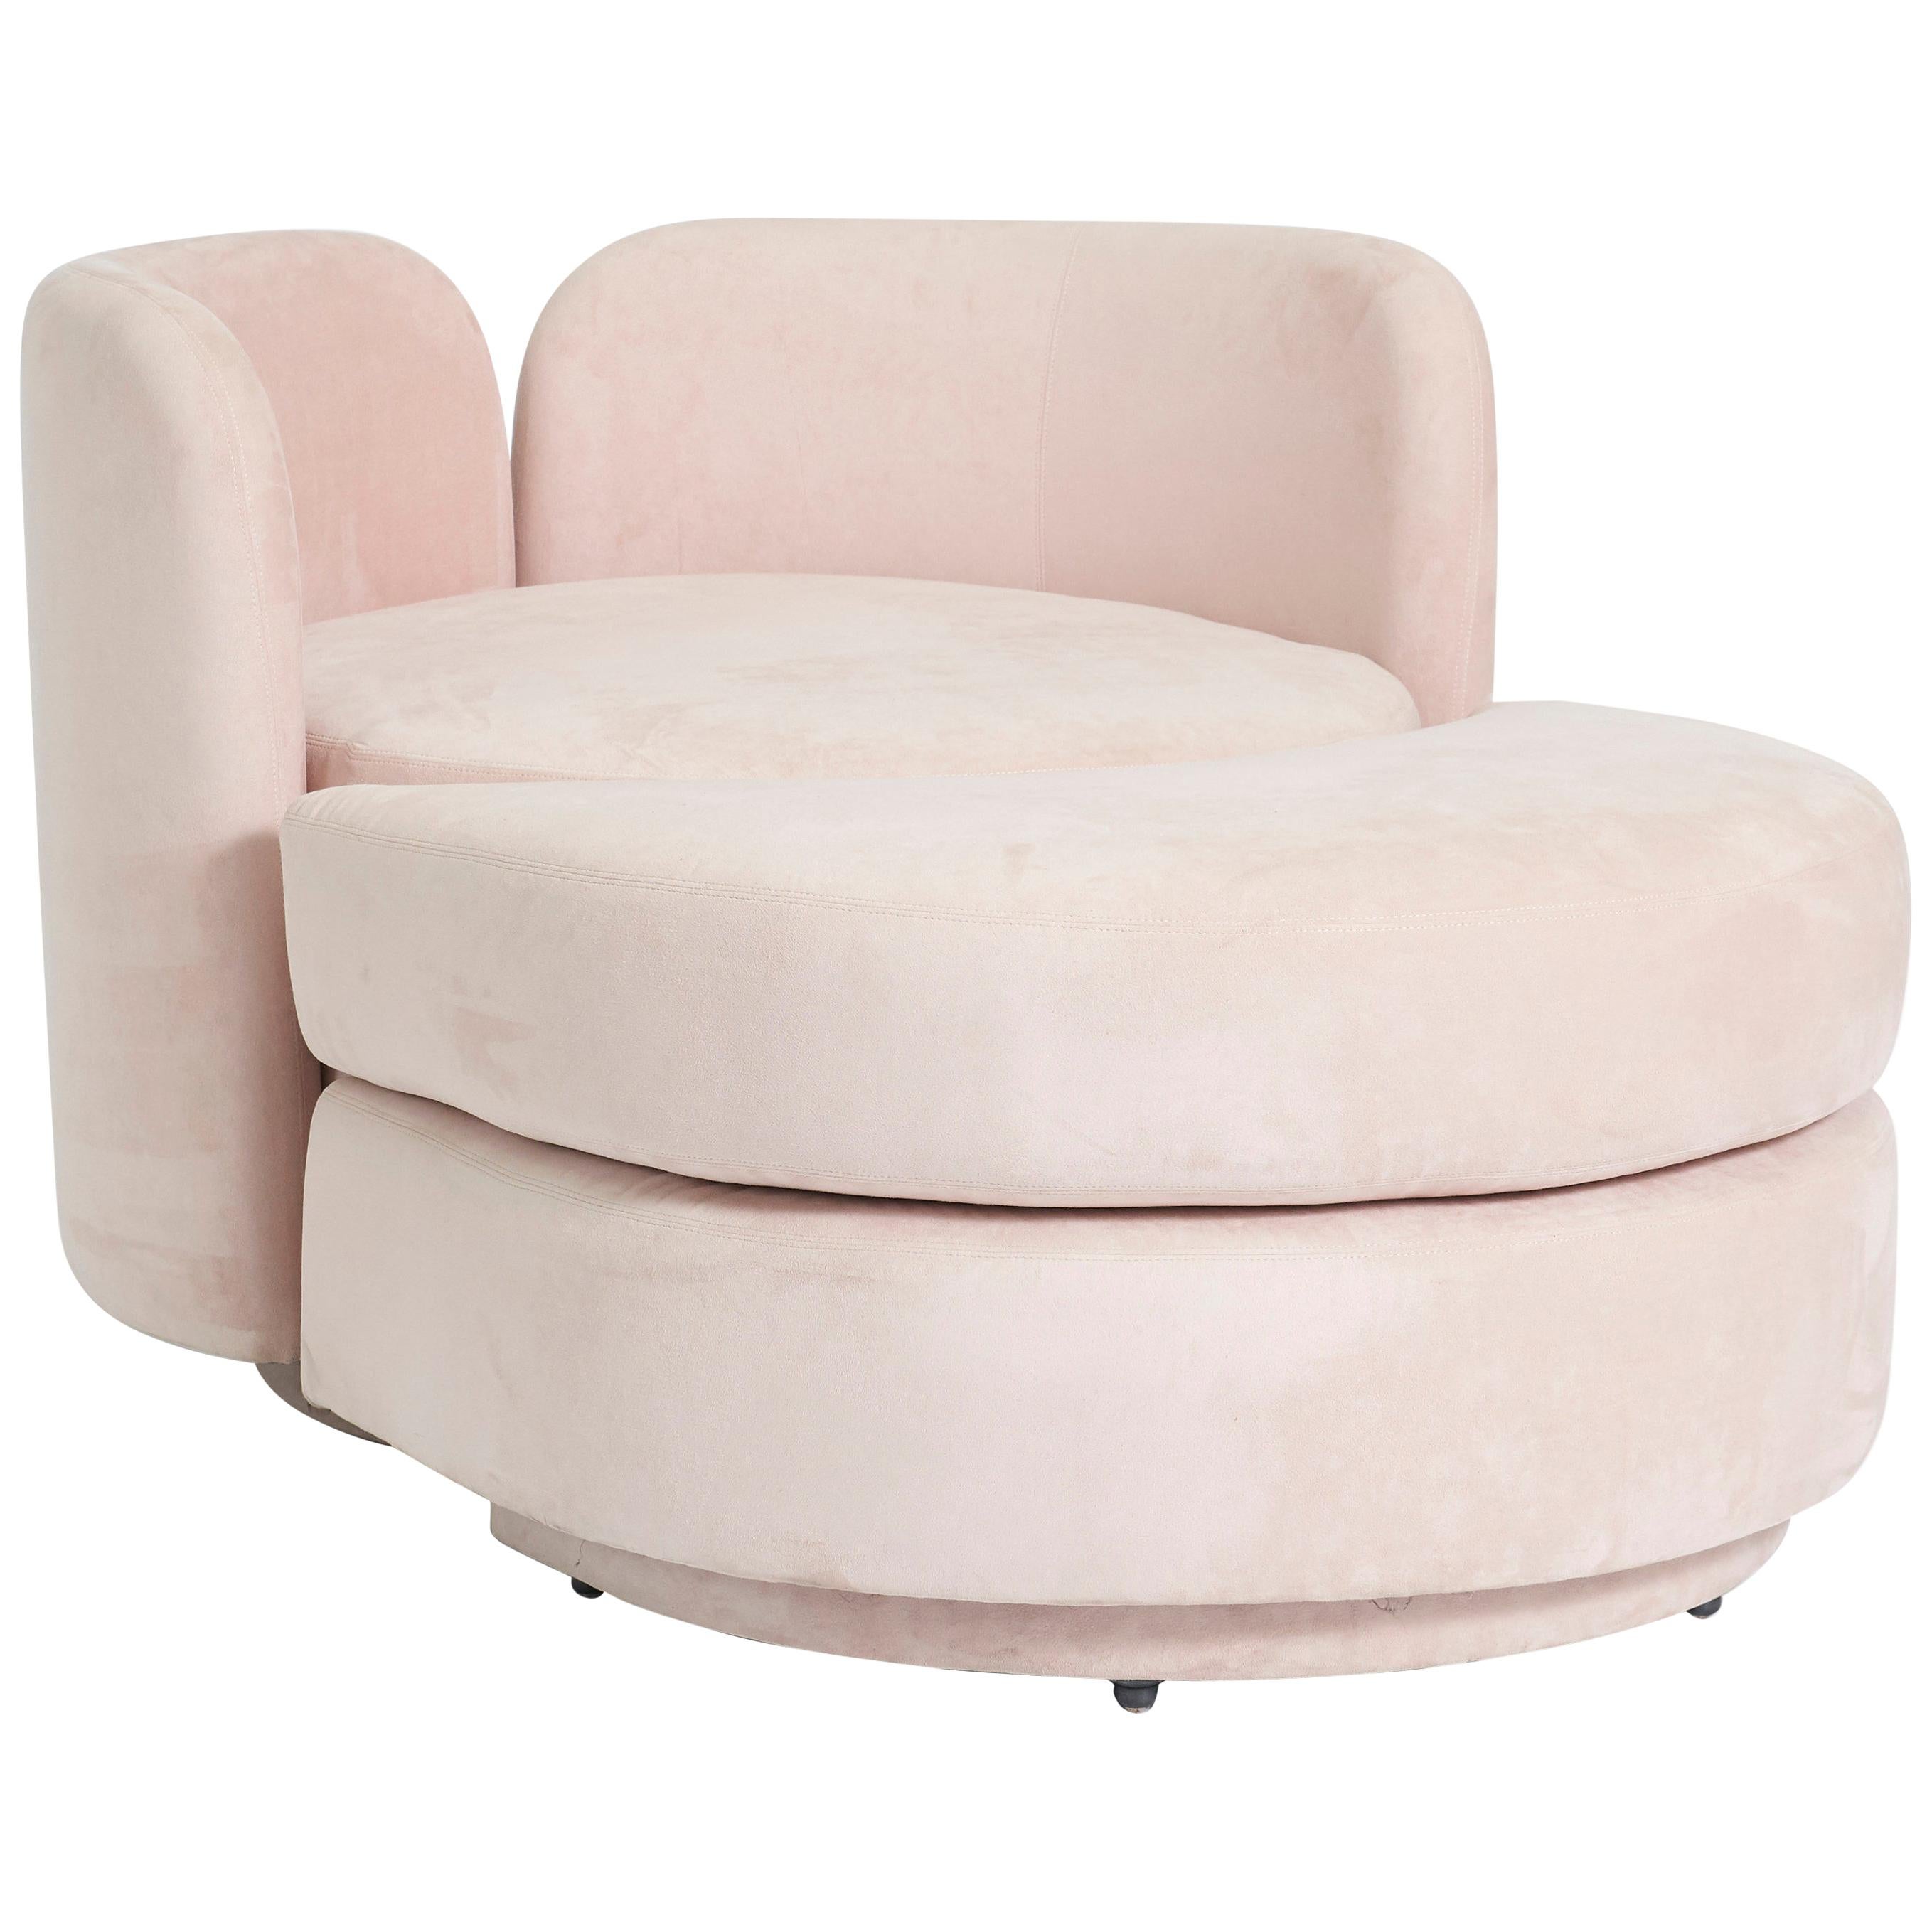 pink chair with ottoman